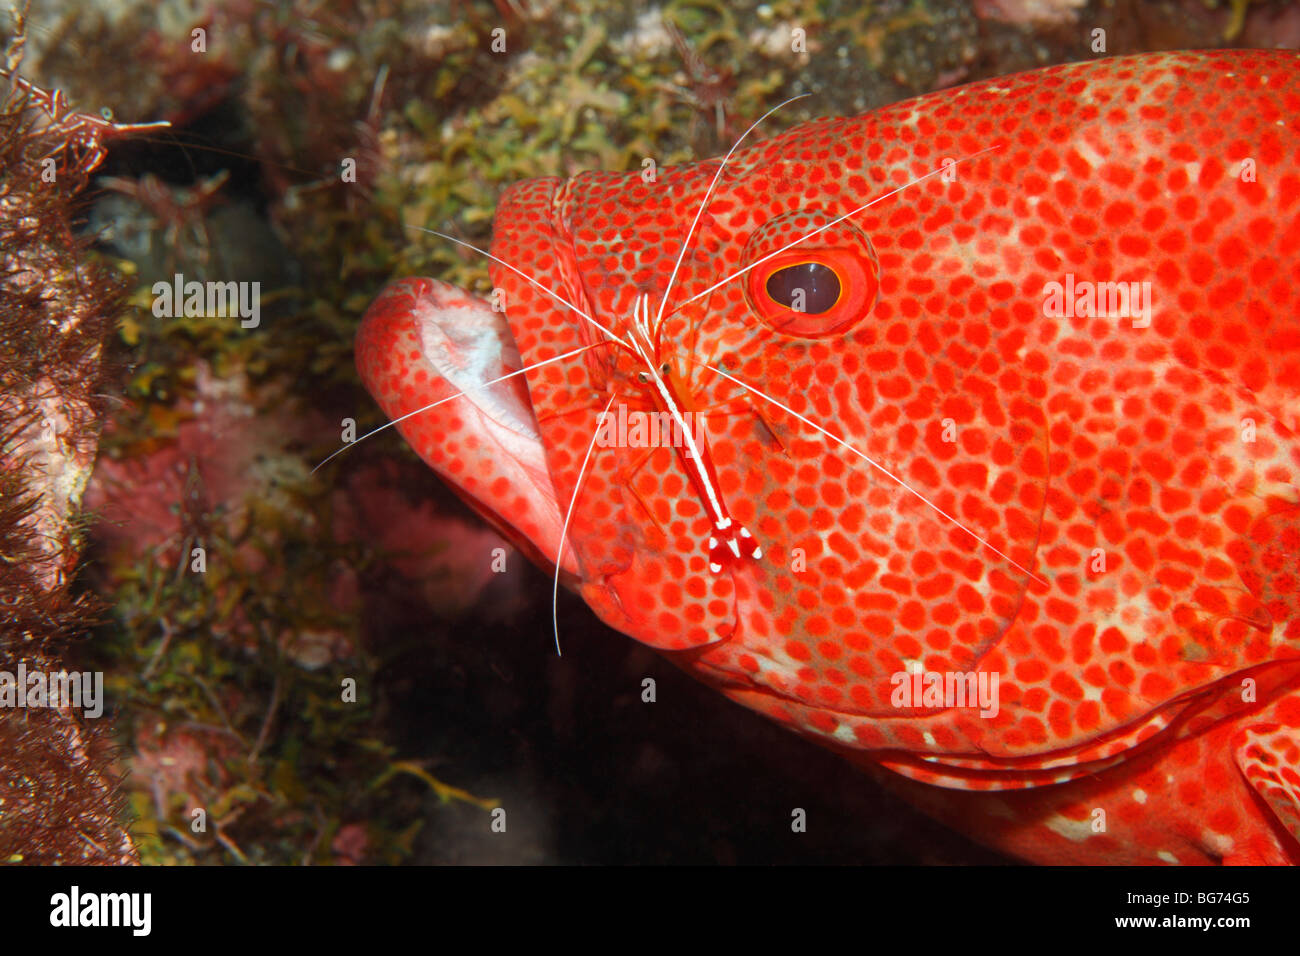 Tomato Cod, or Tomato grouper, Cephalopholis sonnerati, being cleaned by a Cleaner Shrimp, Lysmata amboinensis, Stock Photo